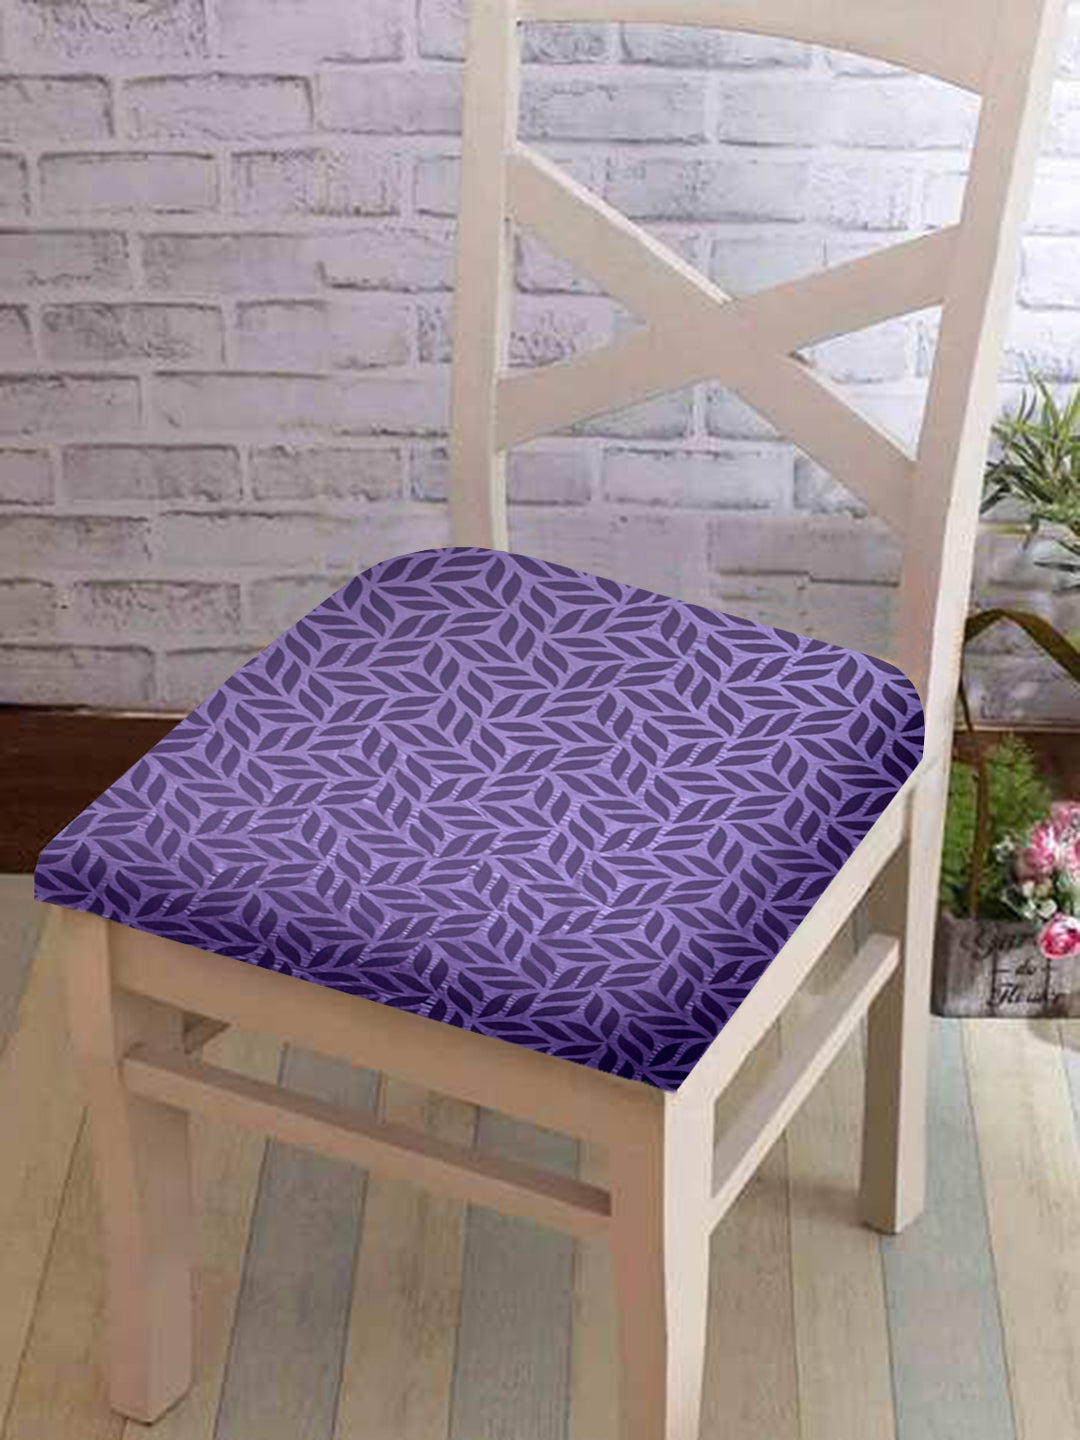 Stretchable Digital Printed Non Slip Chair Pad Cover Pack of 1- Purple